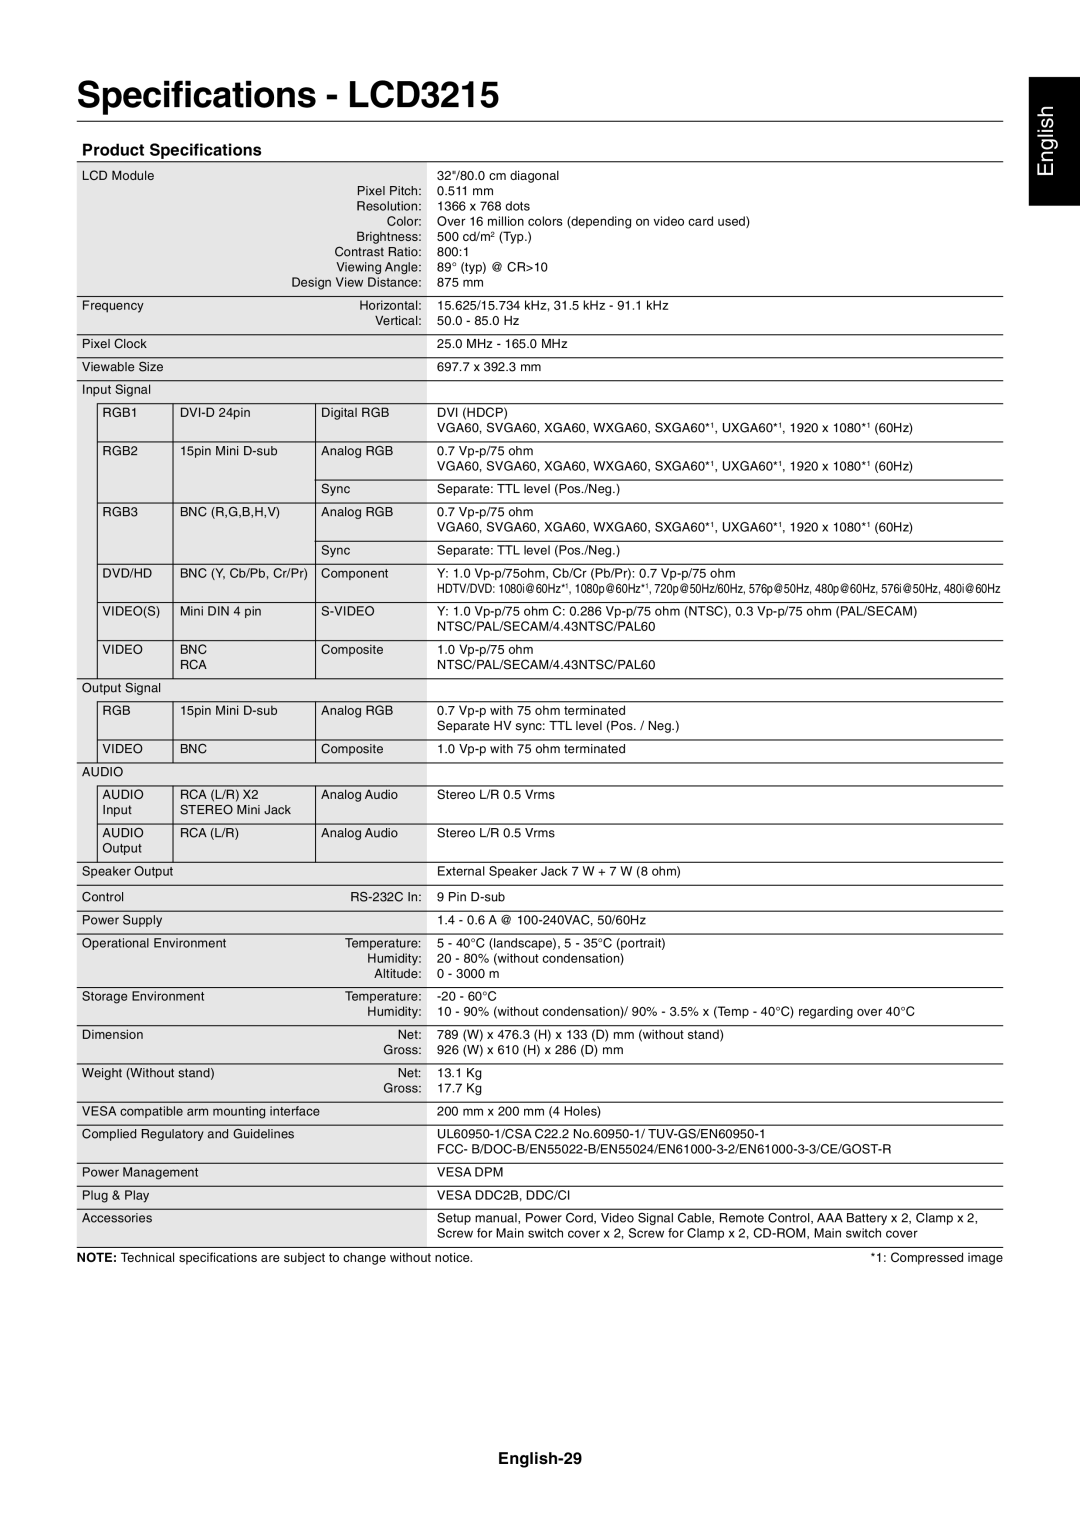 NEC LCD4615 user manual Specifications - LCD3215, Product Specifications, English-29 